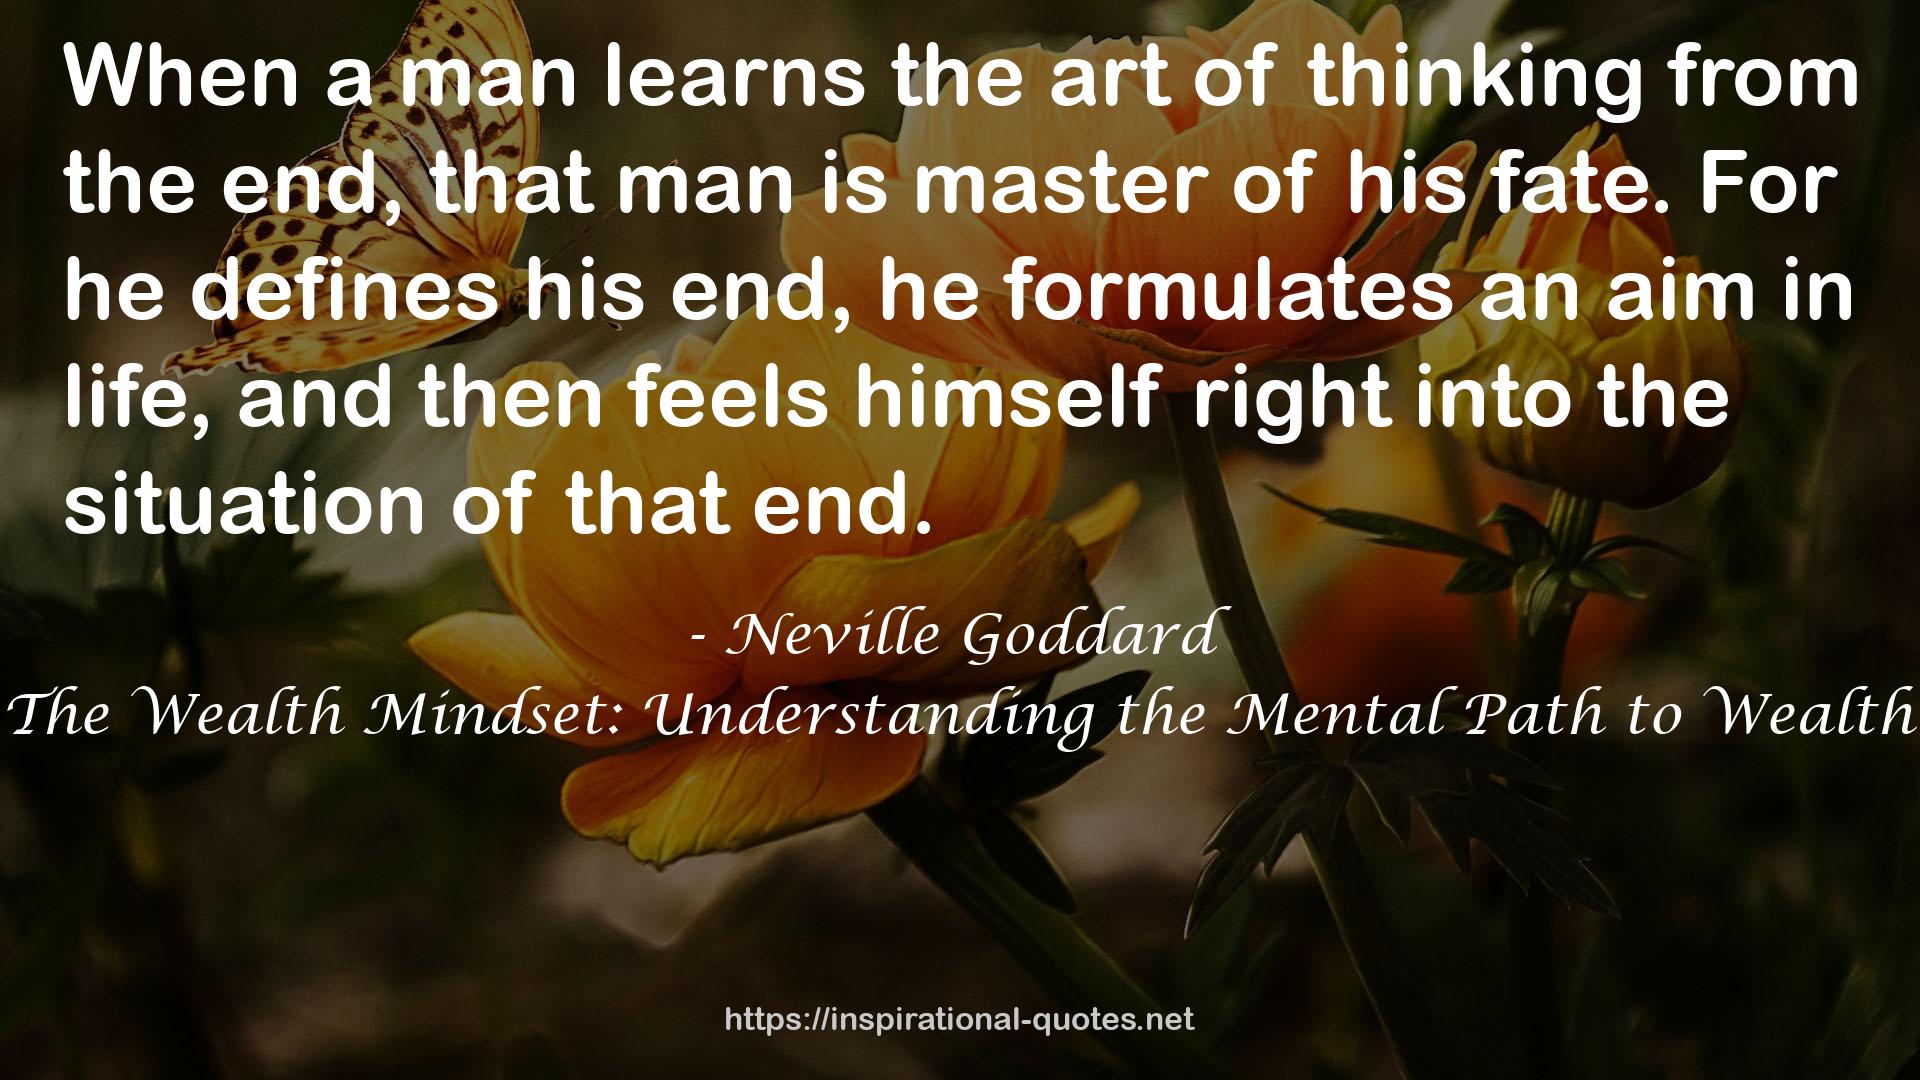 The Wealth Mindset: Understanding the Mental Path to Wealth QUOTES